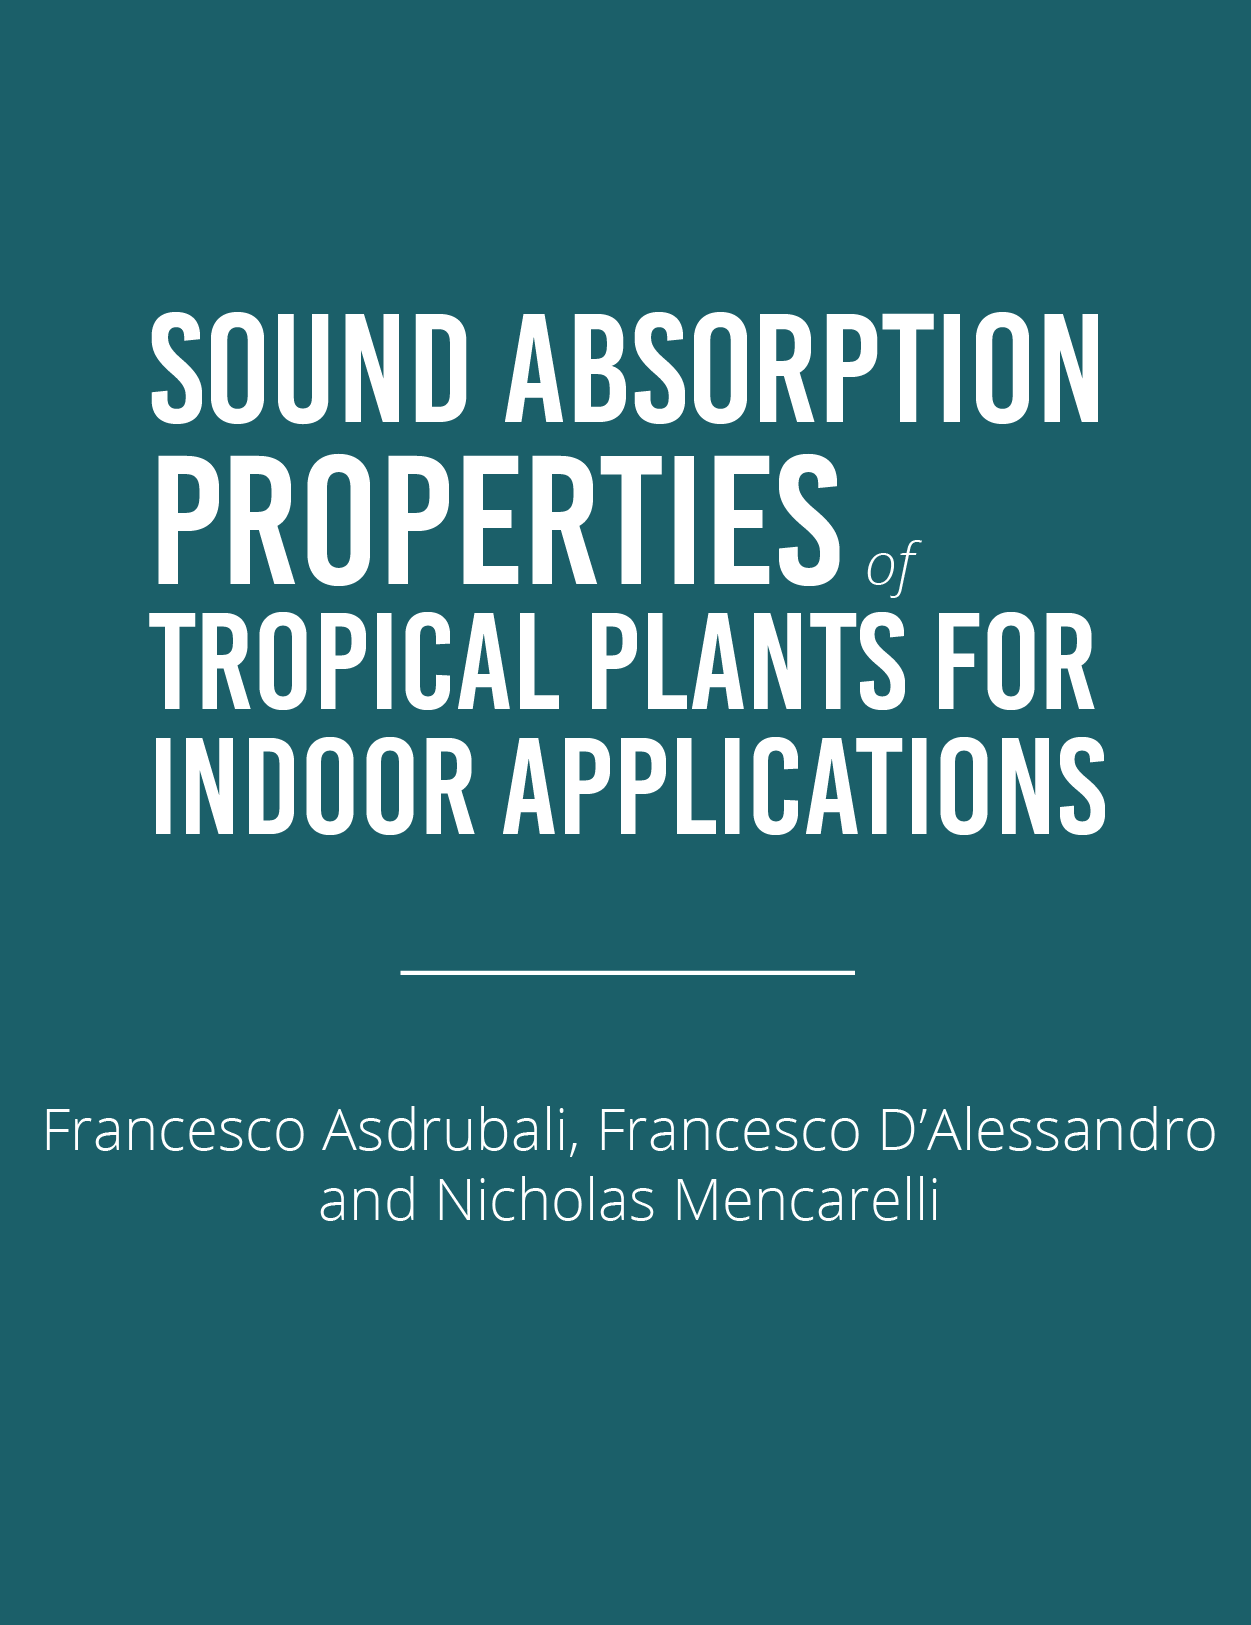 Sound Absorption Properties of Tropical PlantsFeatured Image